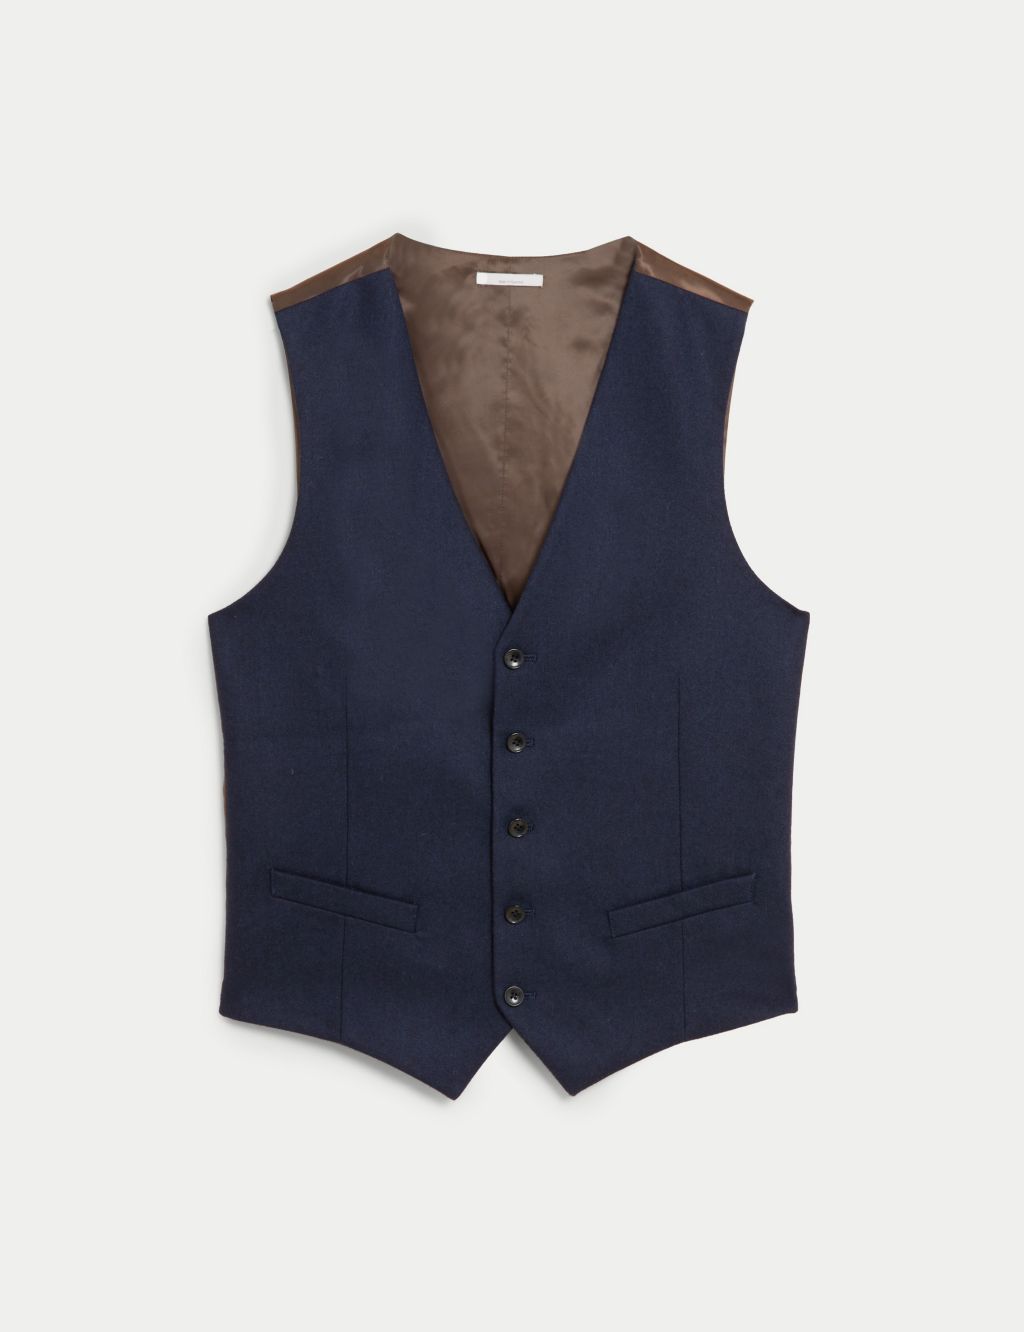 Wool Rich Donegal Waistcoat image 2